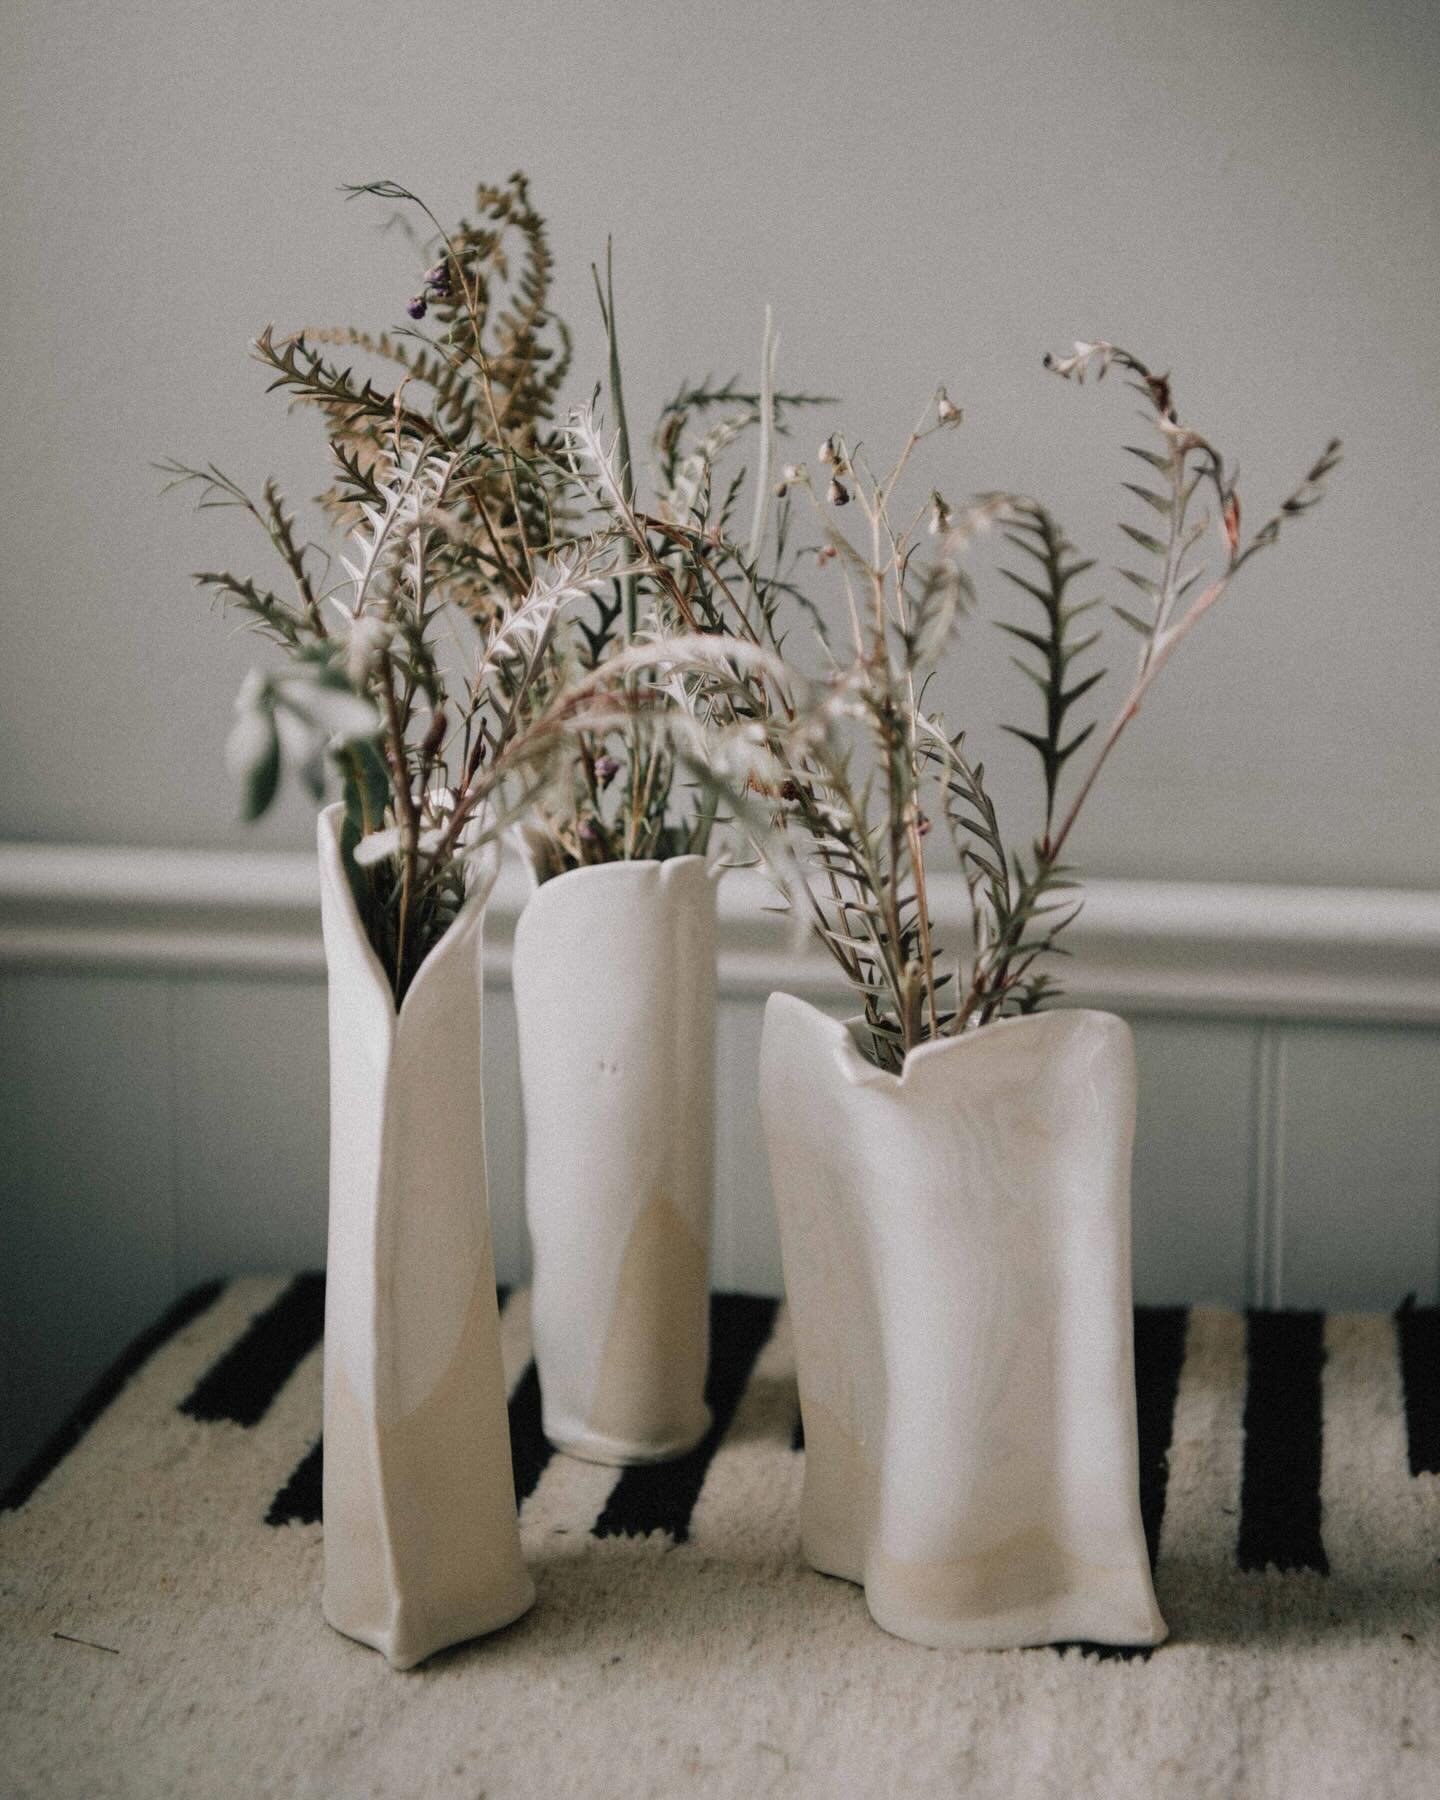 I&rsquo;ve been waiting to introduce this special collaboration with @chao_studio_ on these organic stoneware bud vases made in her home studio in Virginia Beach, VA. Ariannah made these vases based on images from our past meals and was inspired to c